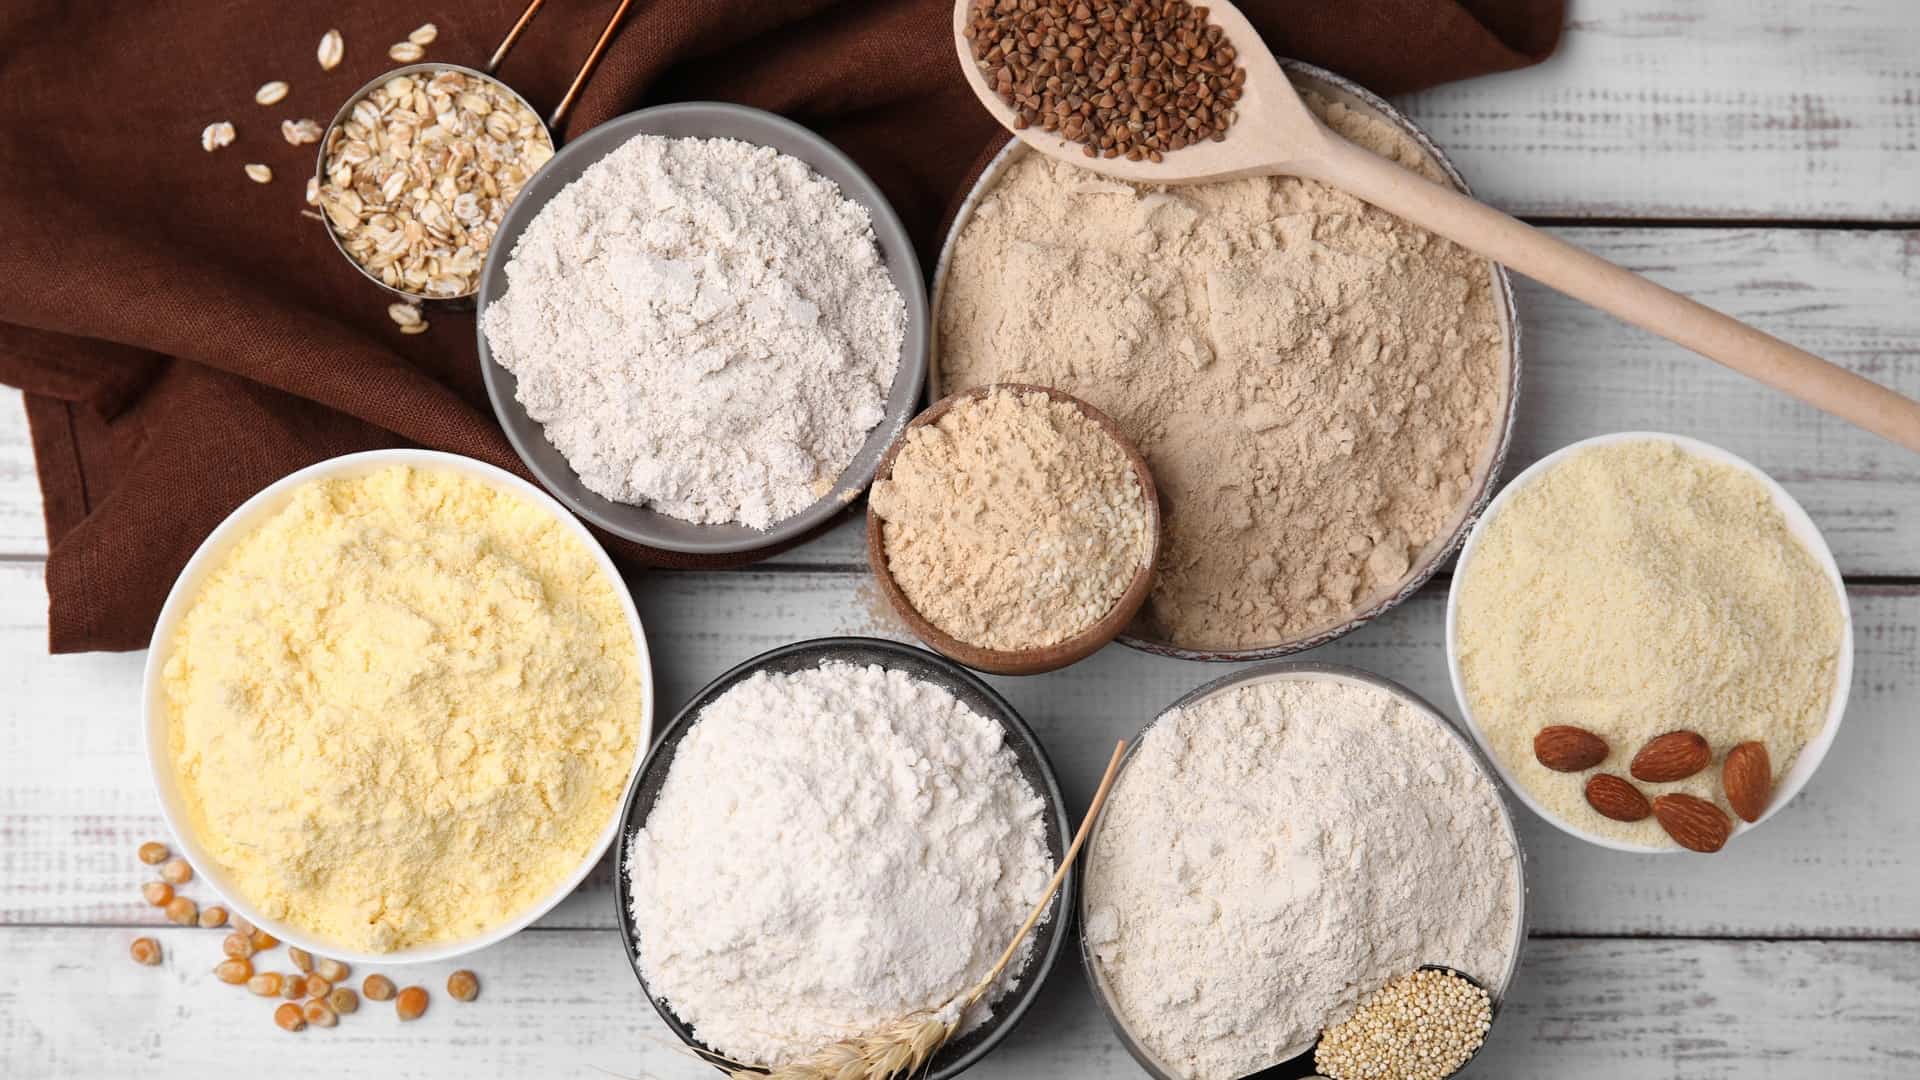 Types of flour in bags on a table